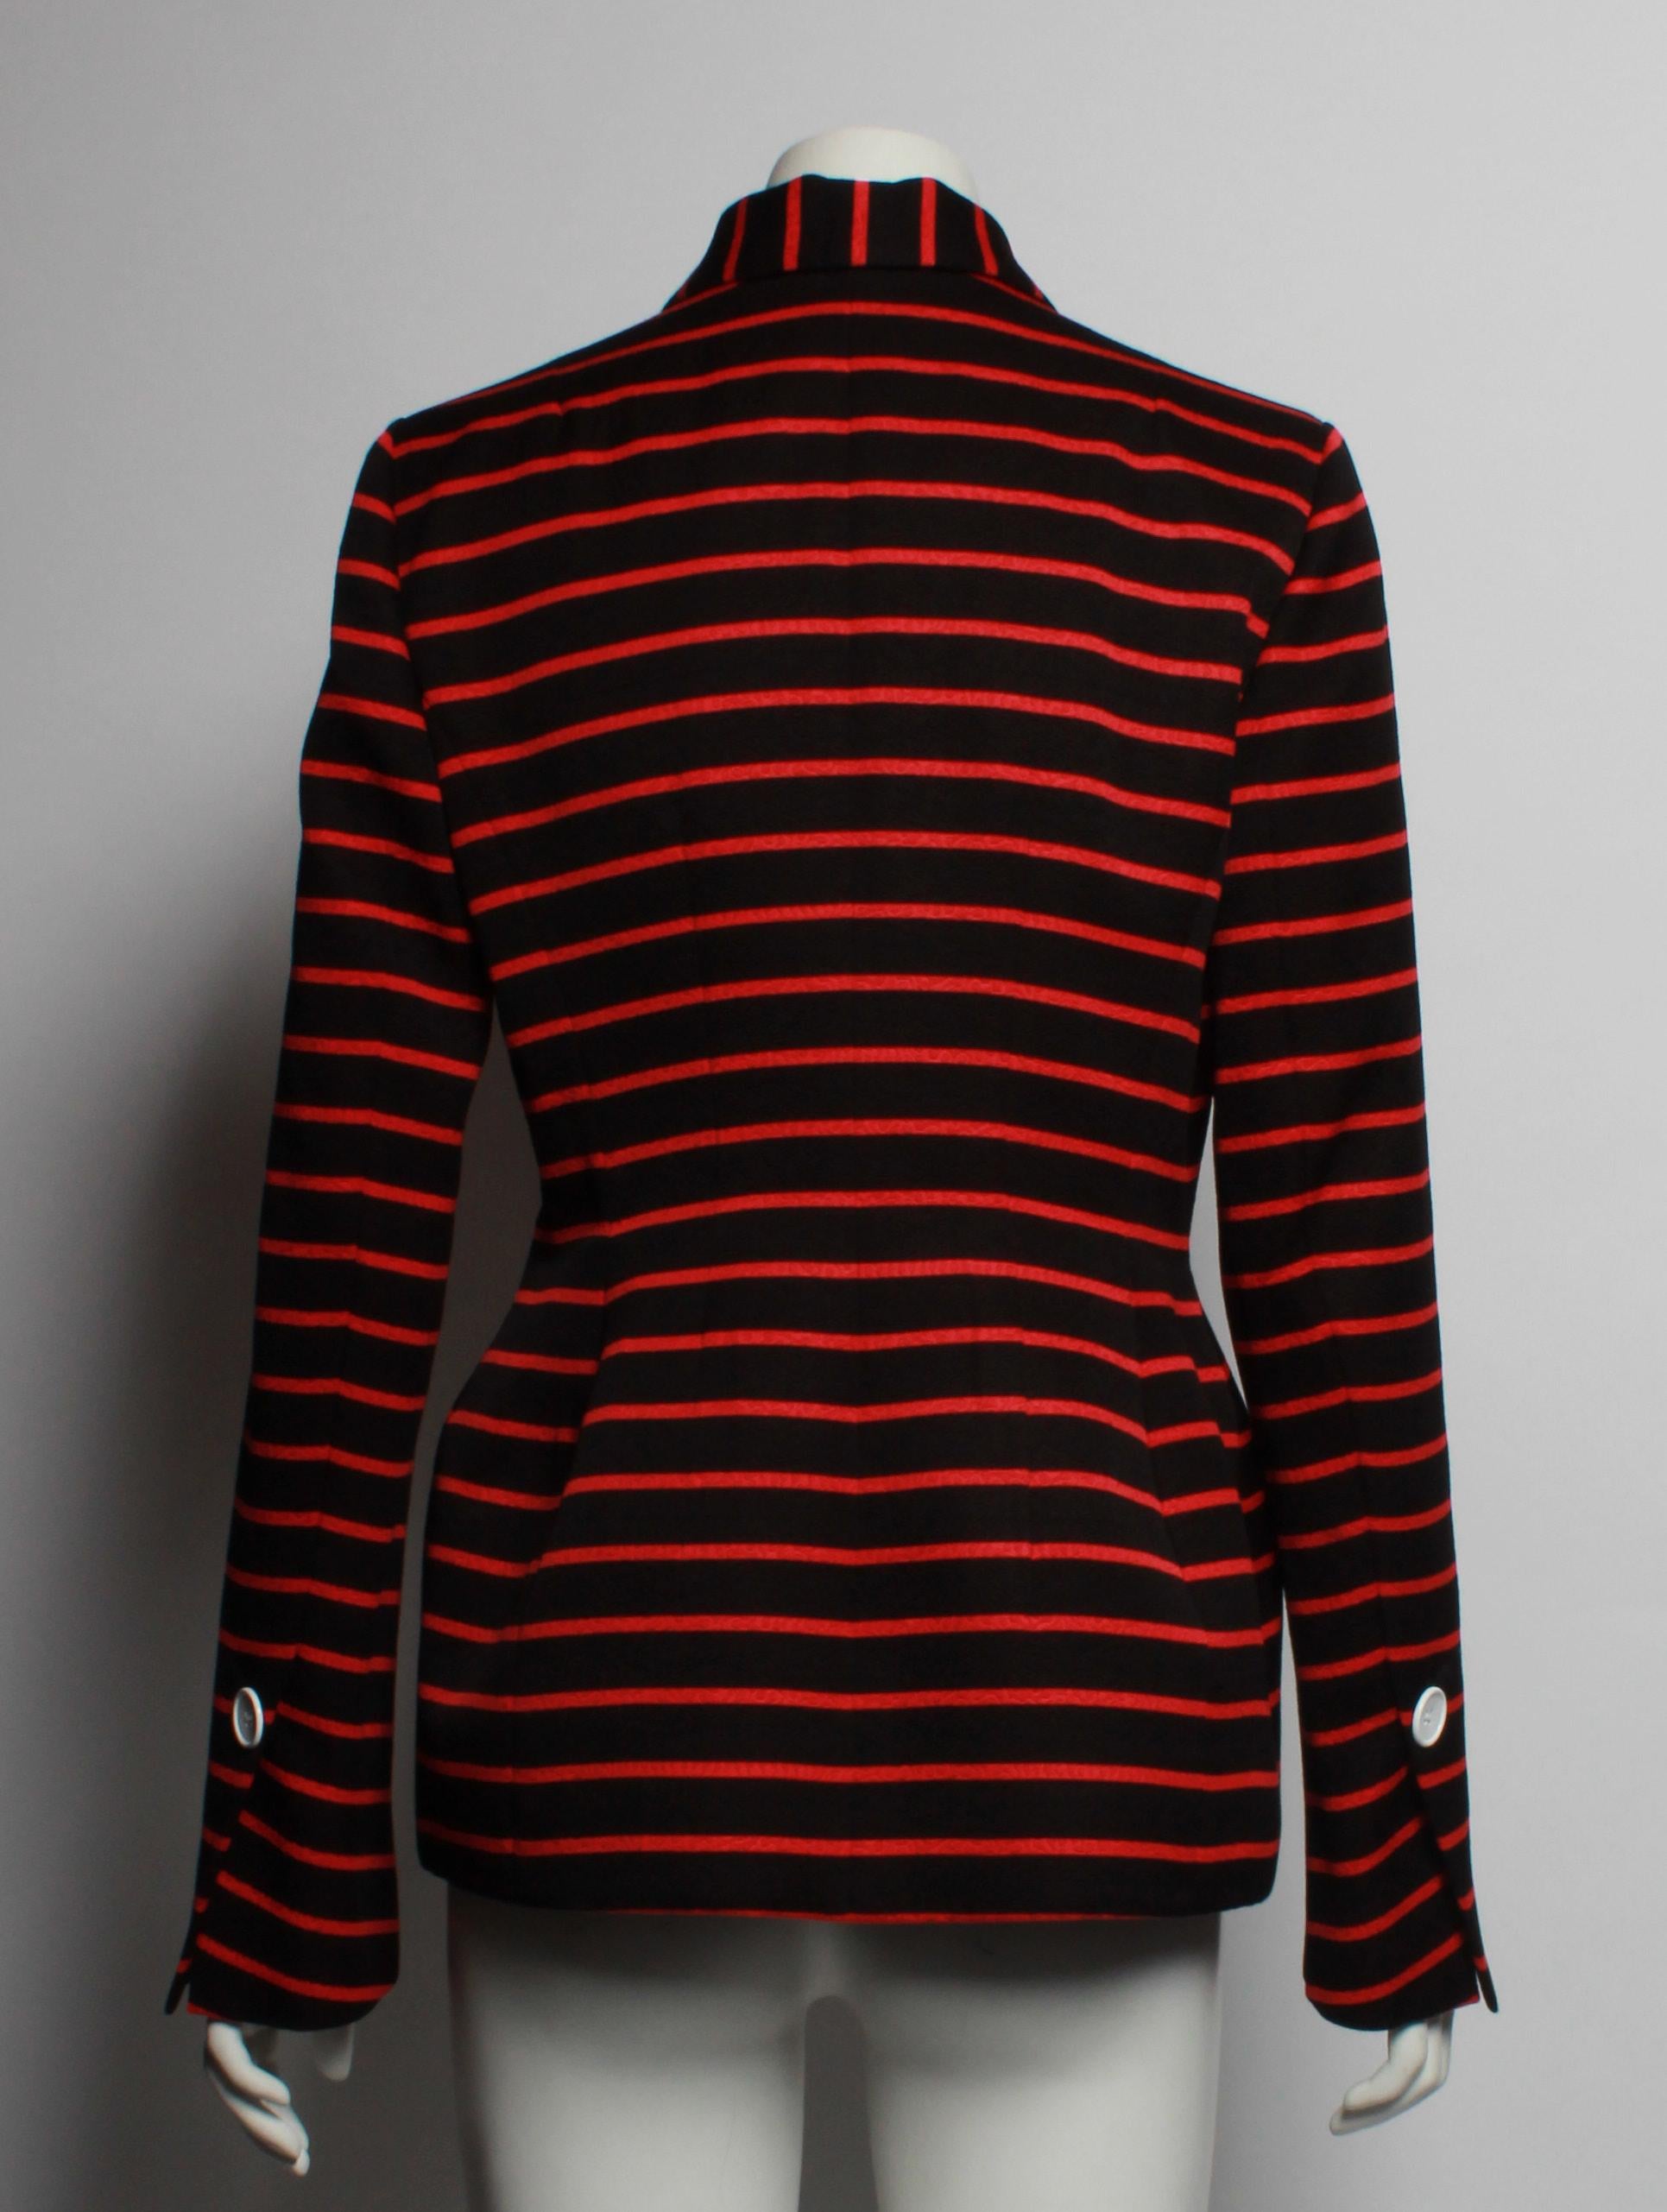 Proenza Schouler 2017 Double Breasted Stripe Jacket In Good Condition In Melbourne, Victoria